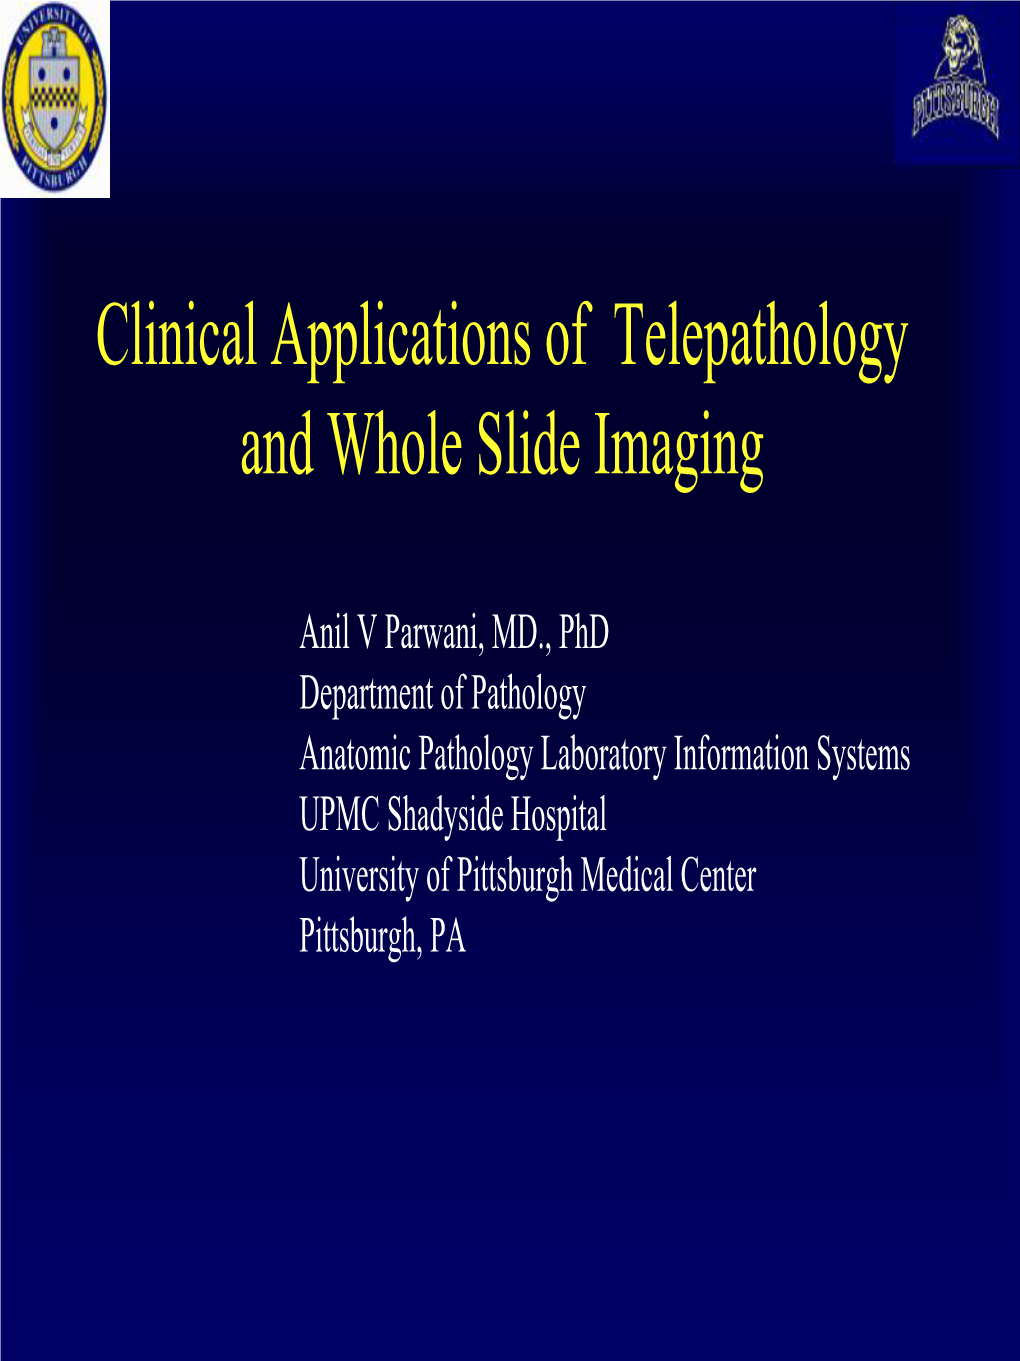 Clinical Applications of Telepathology and Whole Slide Imaging